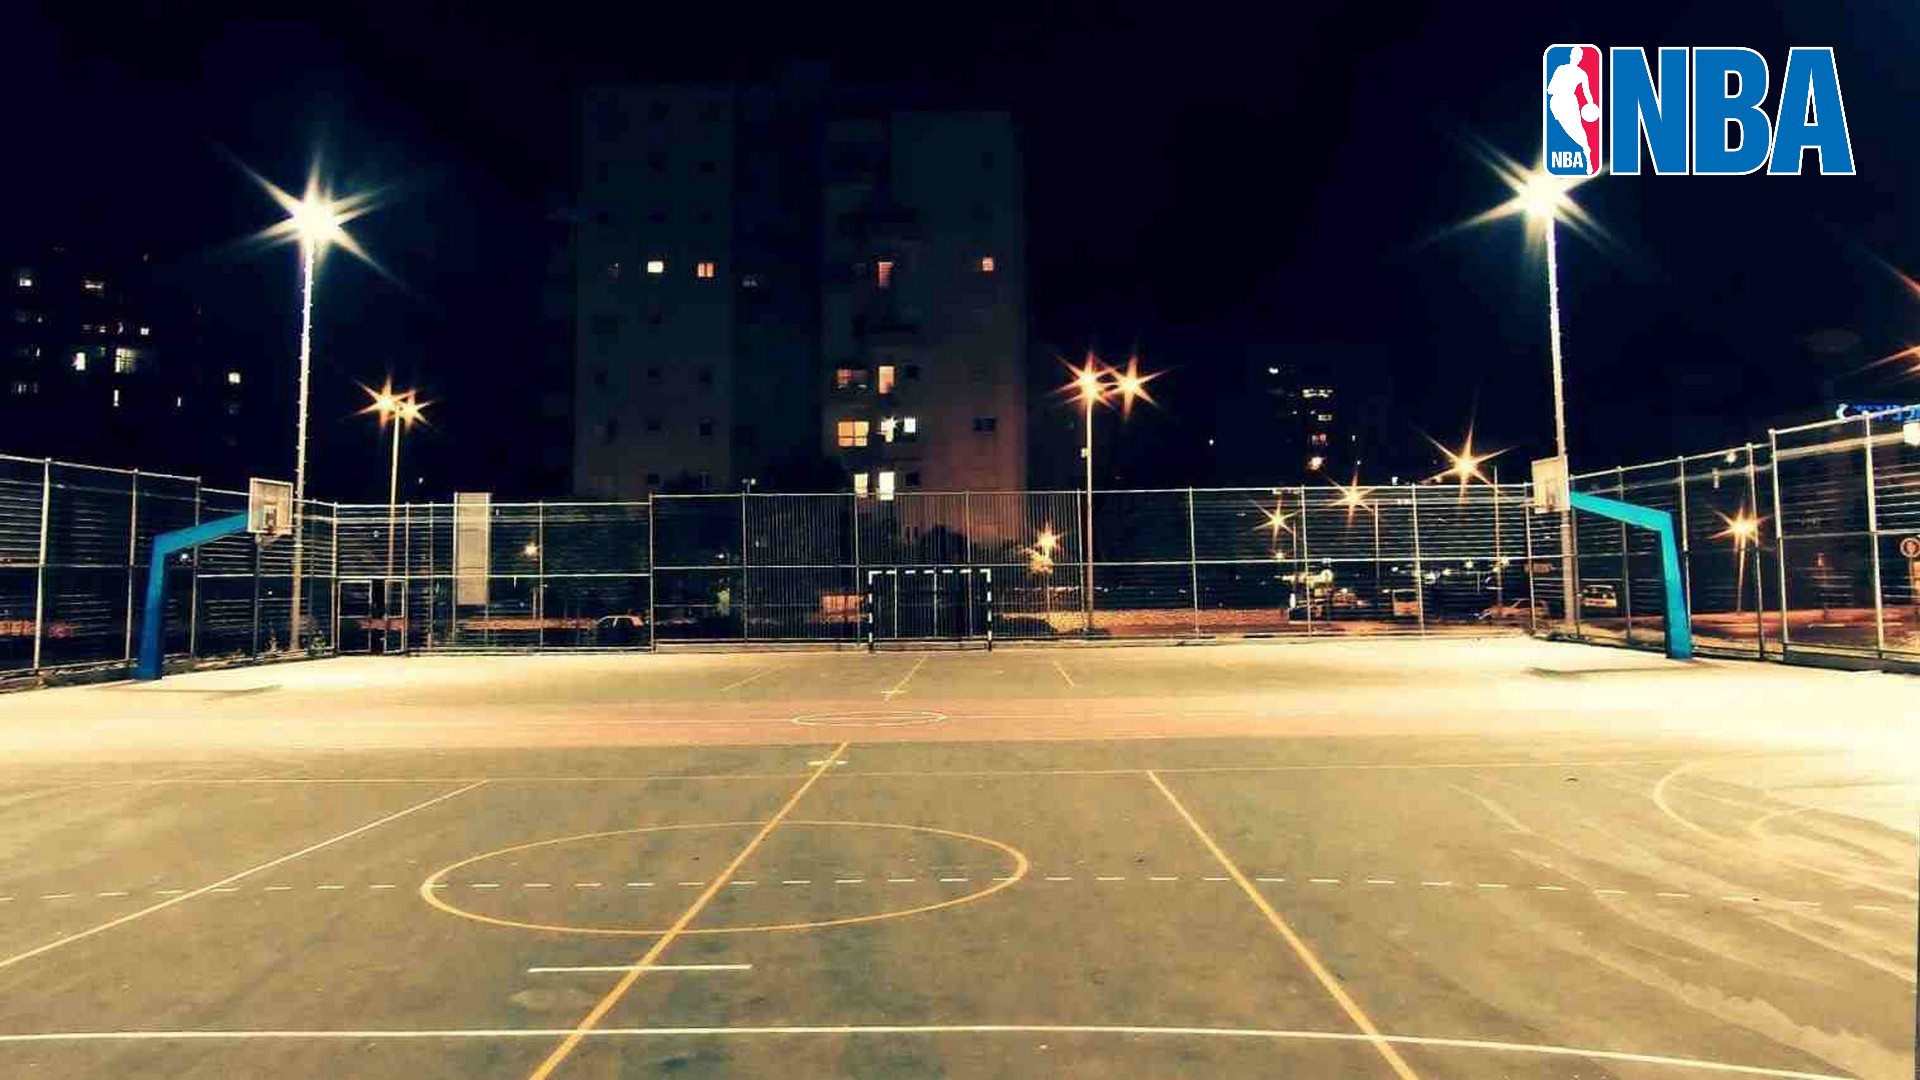 Backgrounds Basketball Court HD with image dimensions 1920x1080 pixel. You can make this wallpaper for your Desktop Computer Backgrounds, Windows or Mac Screensavers, iPhone Lock screen, Tablet or Android and another Mobile Phone device